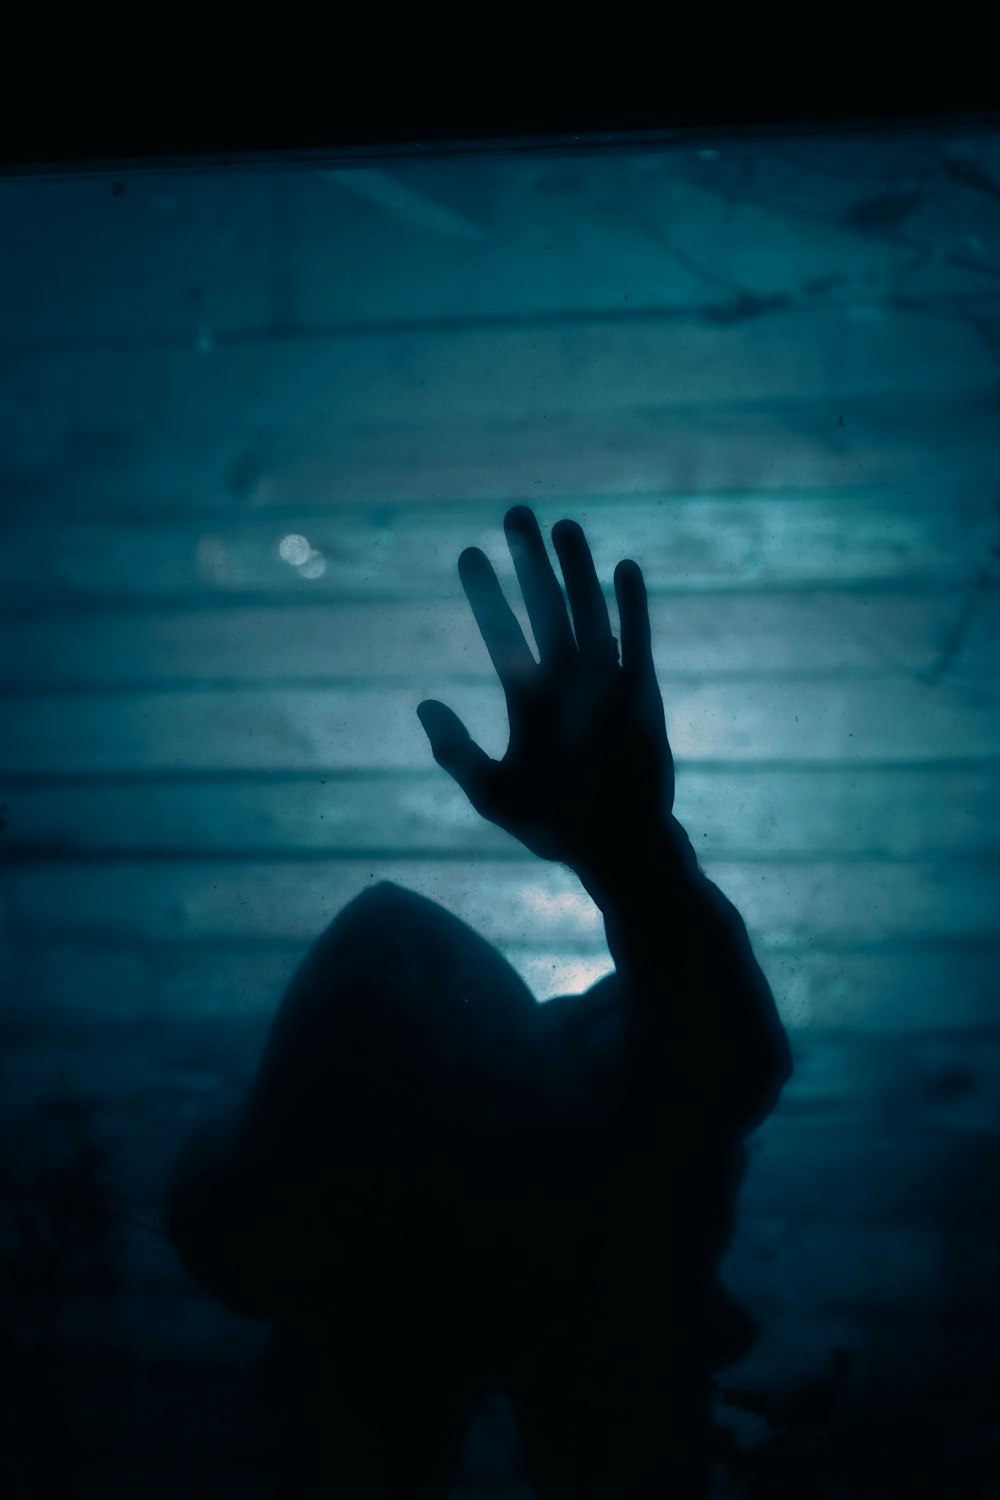 a silhouette of a hand reaching up into the air